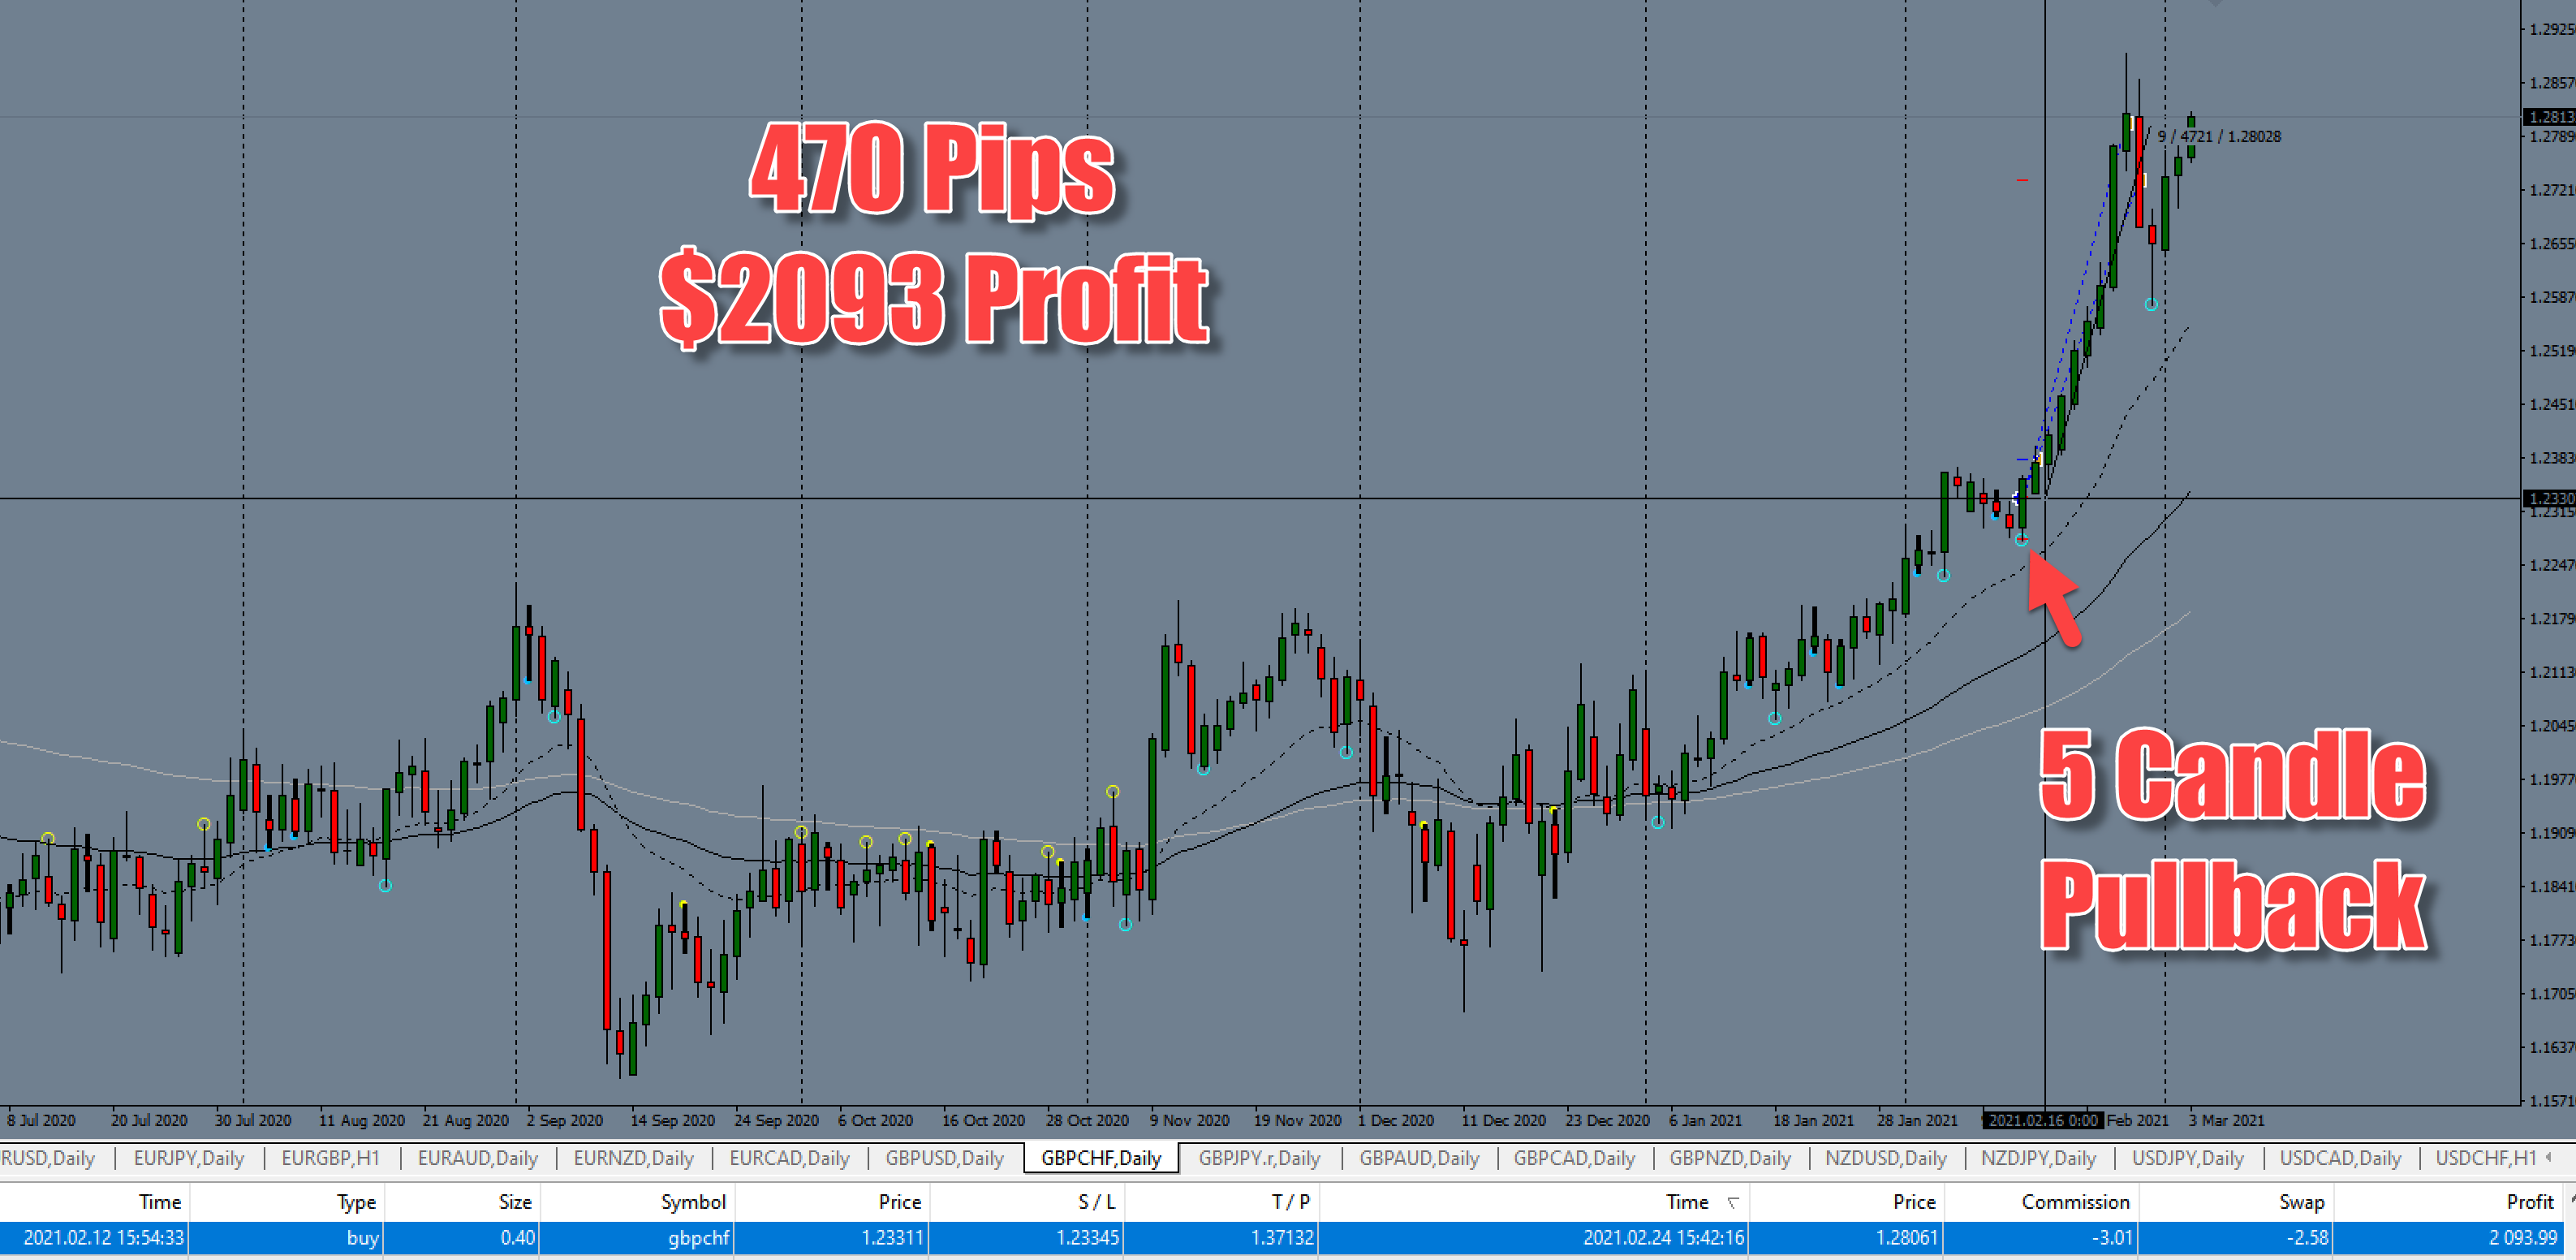 470 Pips on a single trade signal on GBP/CHF